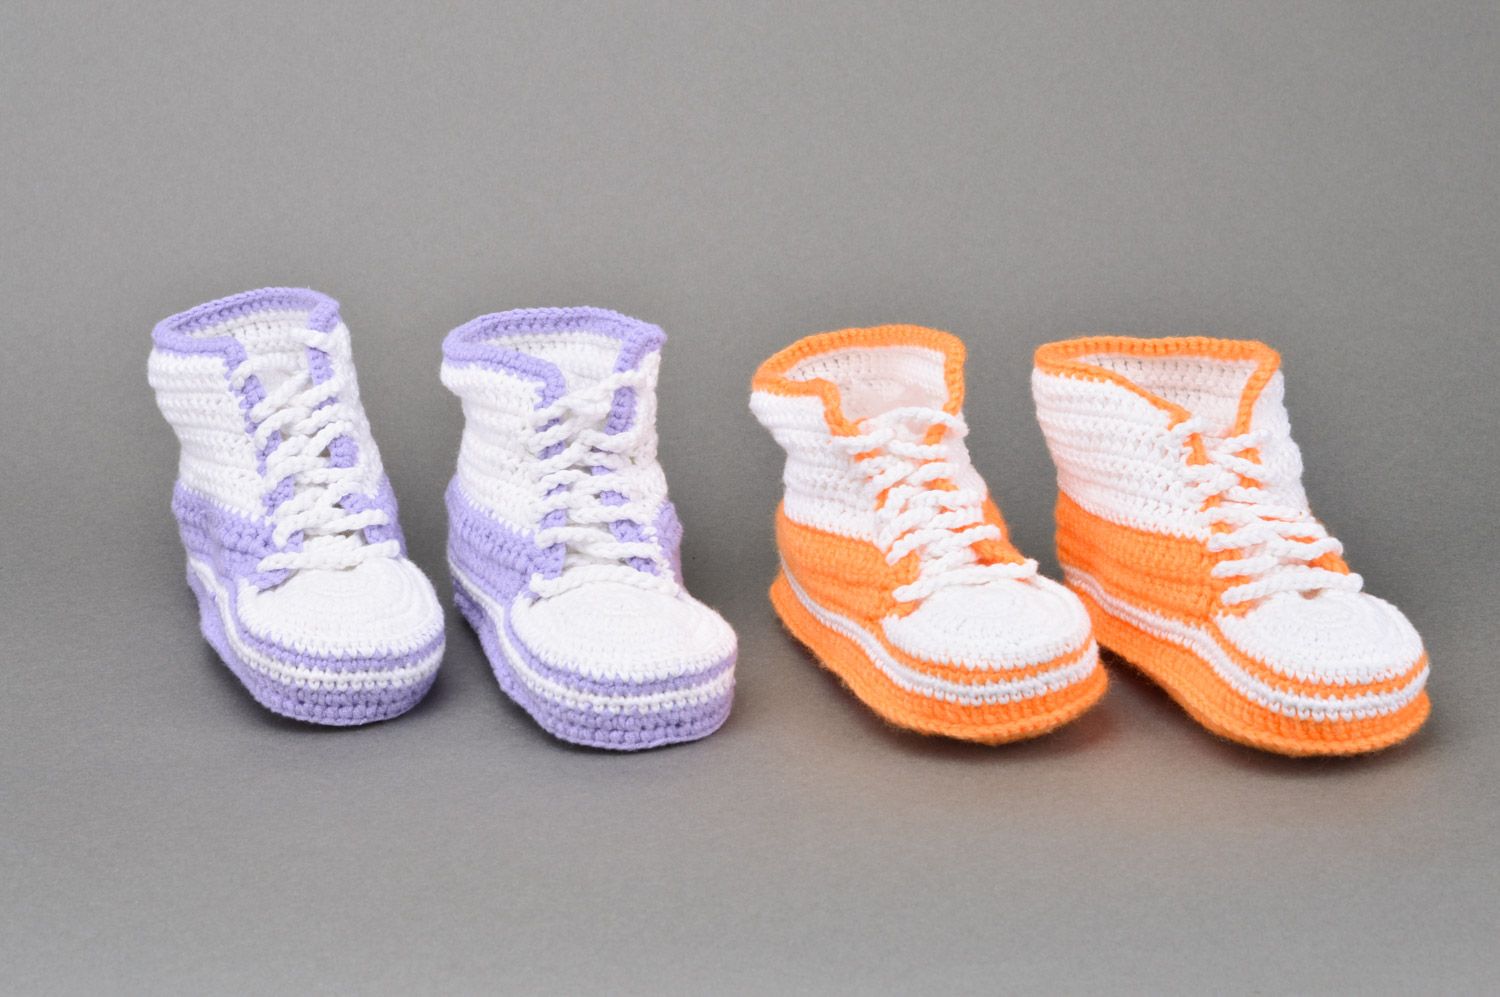 Handmade crocheted baby booties set of 2 pairs in orange and purple colors photo 2